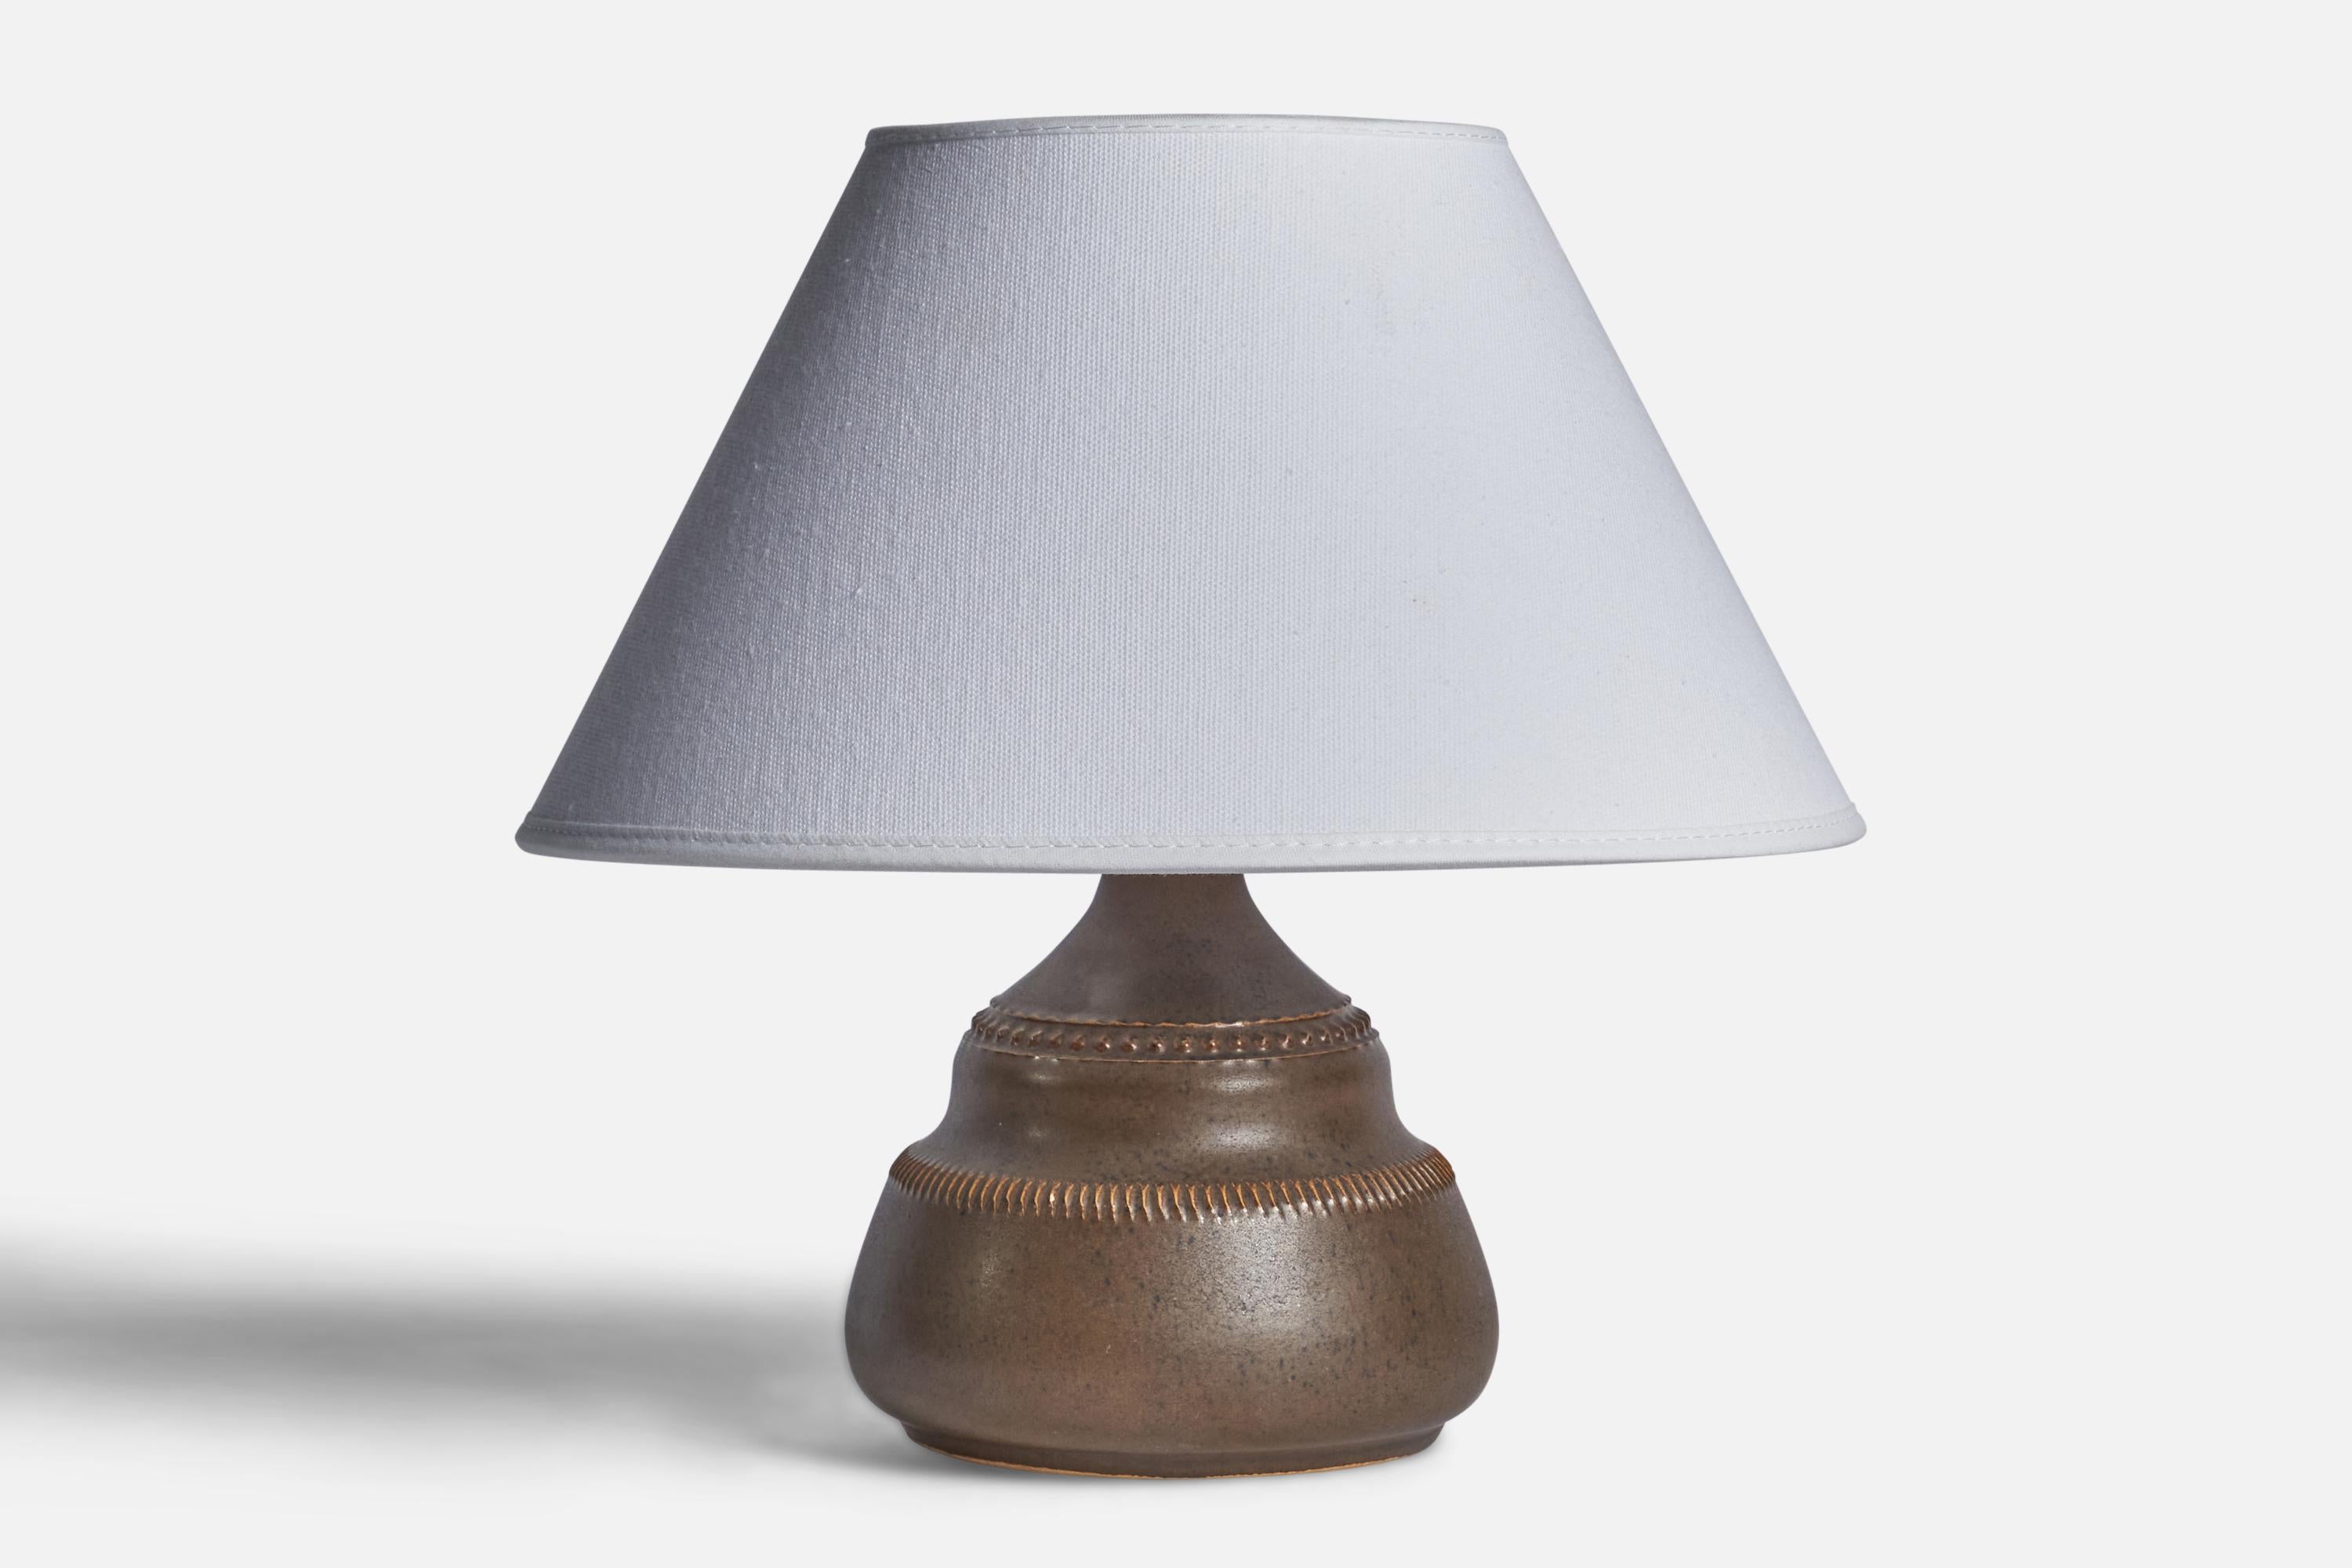 A brown-glazed and incised stoneware table lamp designed and produced by Klase Höganäs, Sweden, 1960s.

Dimensions of Lamp (inches): 6.5” H x 5” Diameter
Dimensions of Shade (inches): 7” Top Diameter x 10” Bottom Diameter x 5.5” H 
Dimensions of